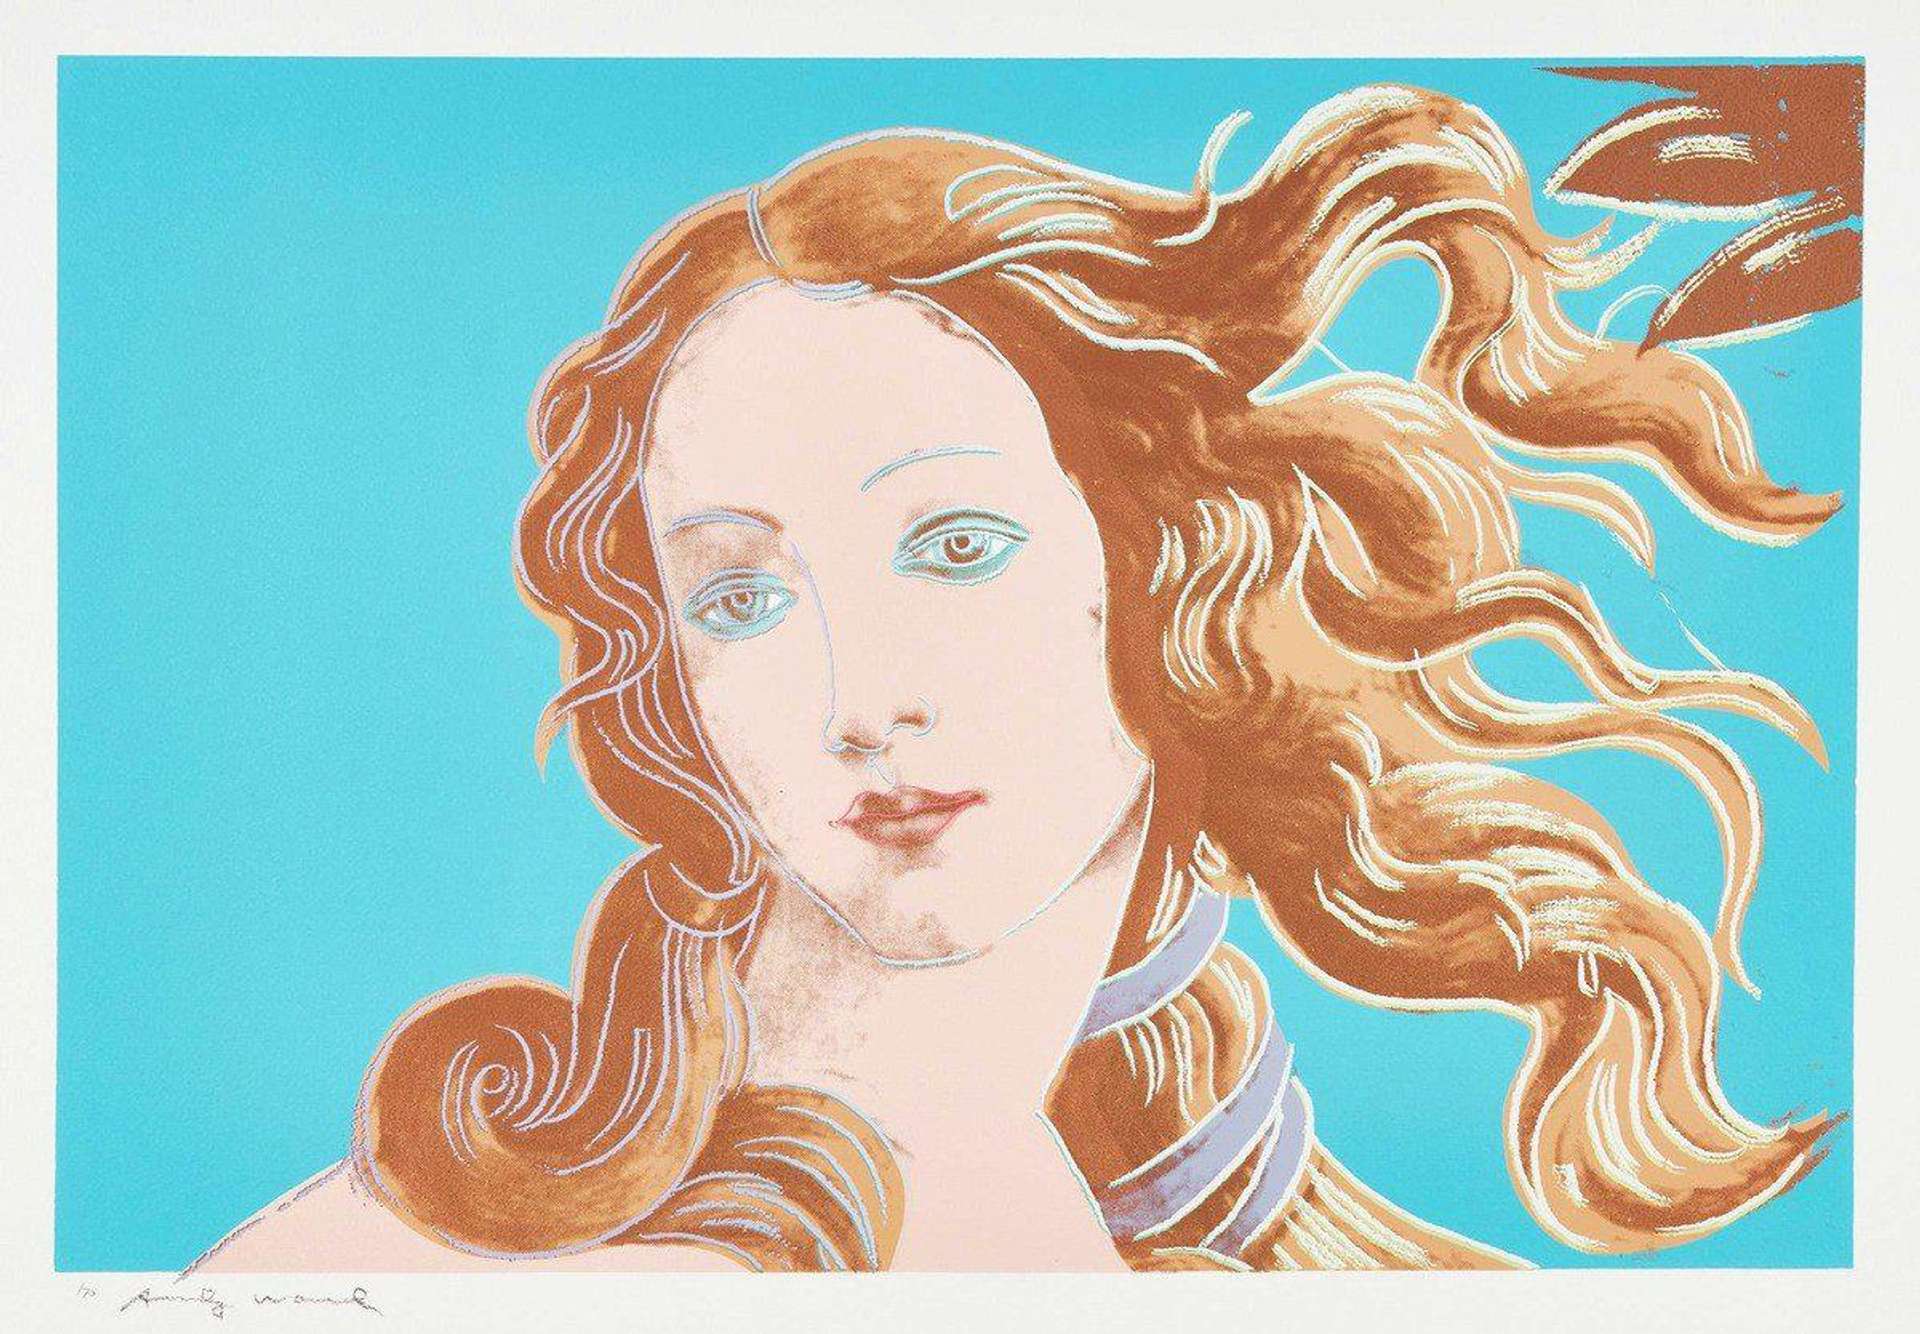 Details Of Renaissance Paintings (Sandro Botticelli, Birth Of Venus 1482, F & S 11.319) by Andy Warhol